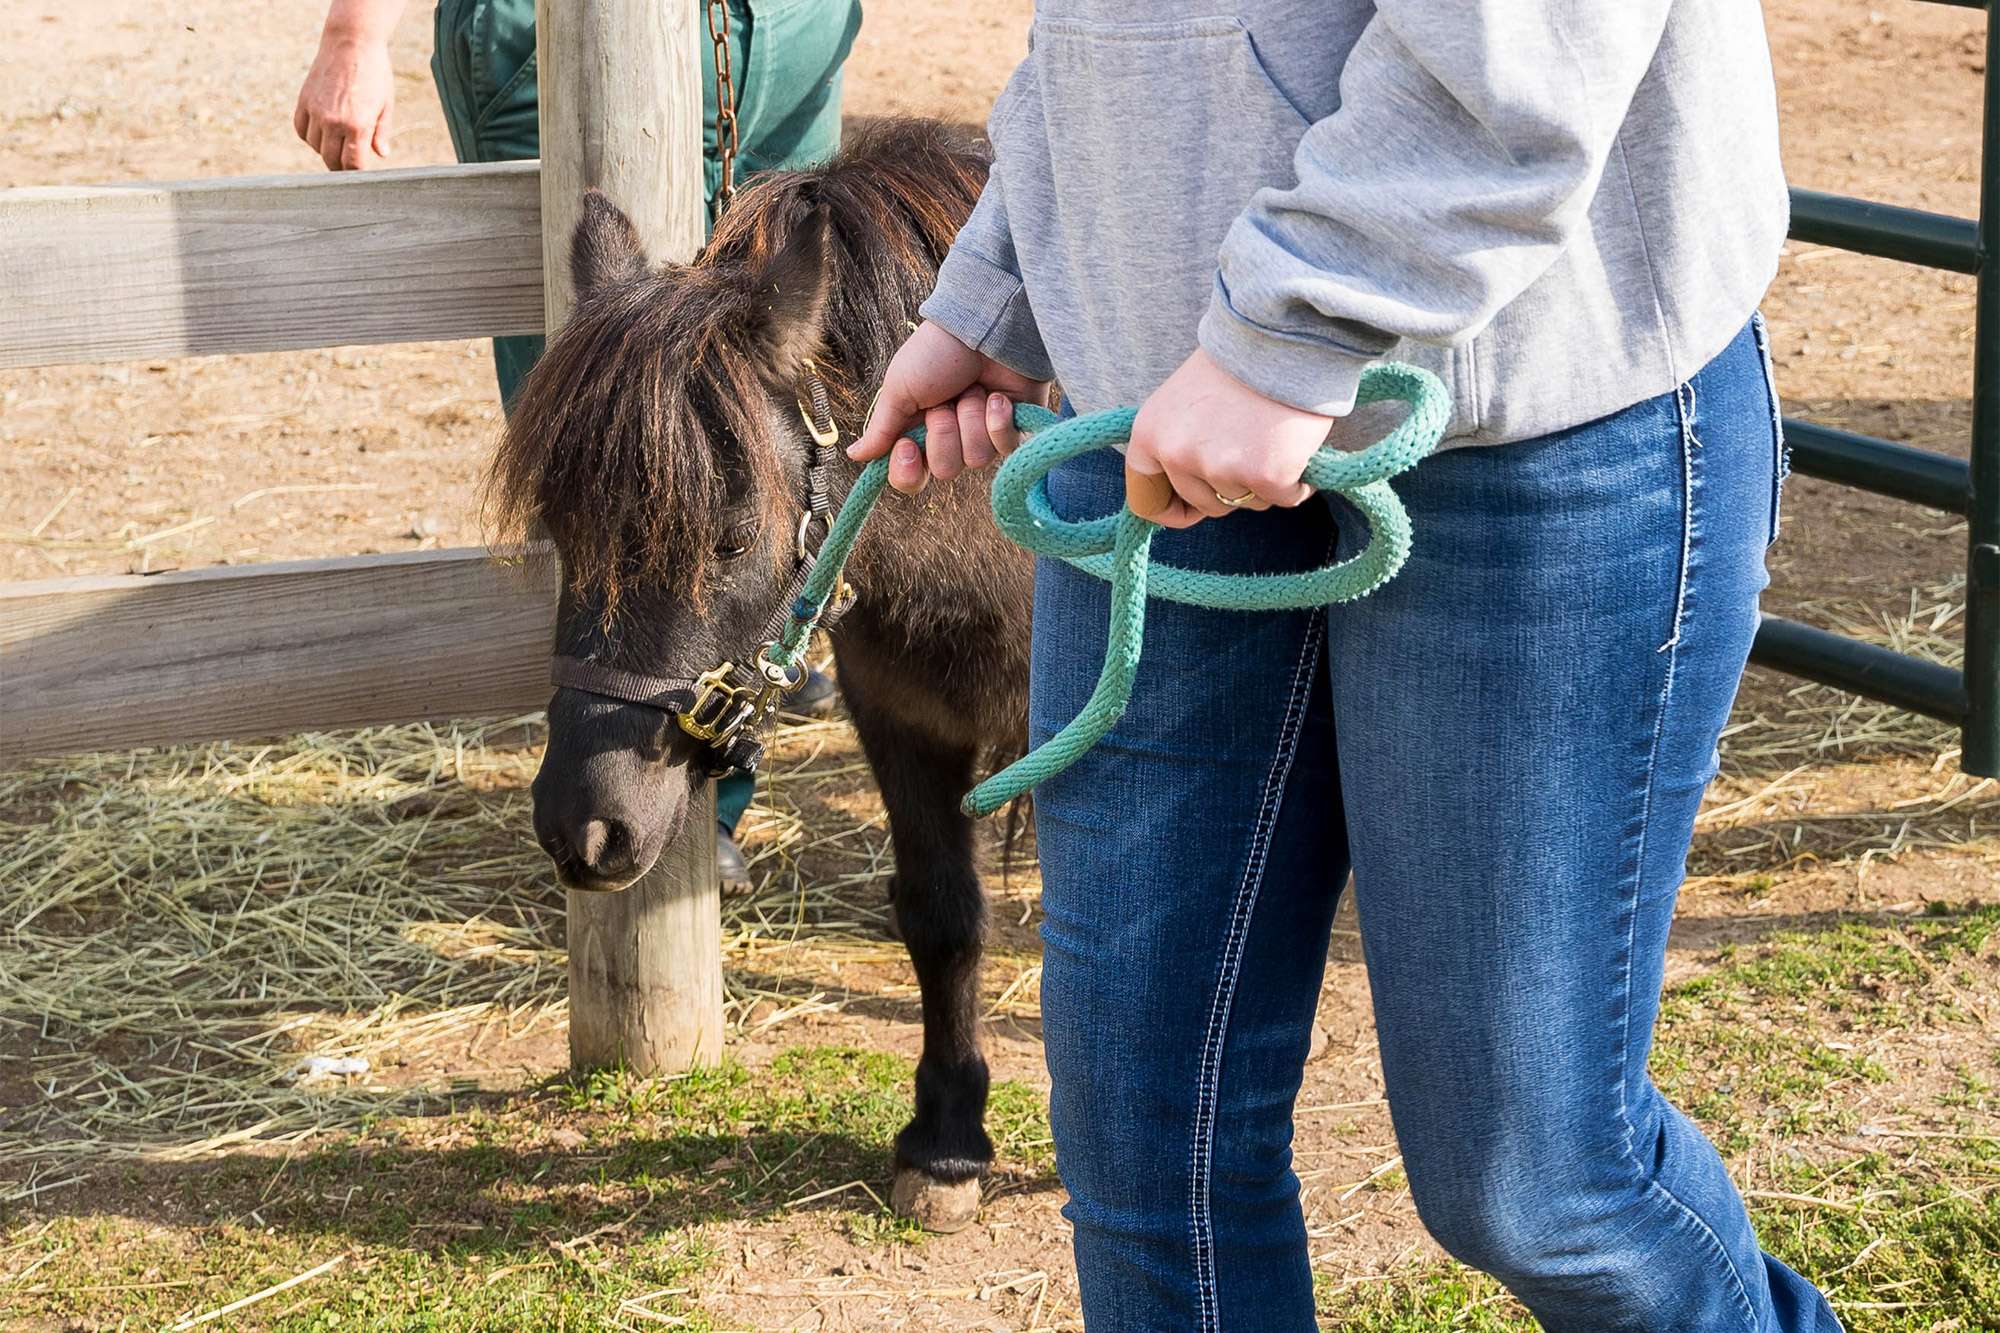 A Veterinary Technician is walking outside on a farm next to a brown horse connected to a leash.